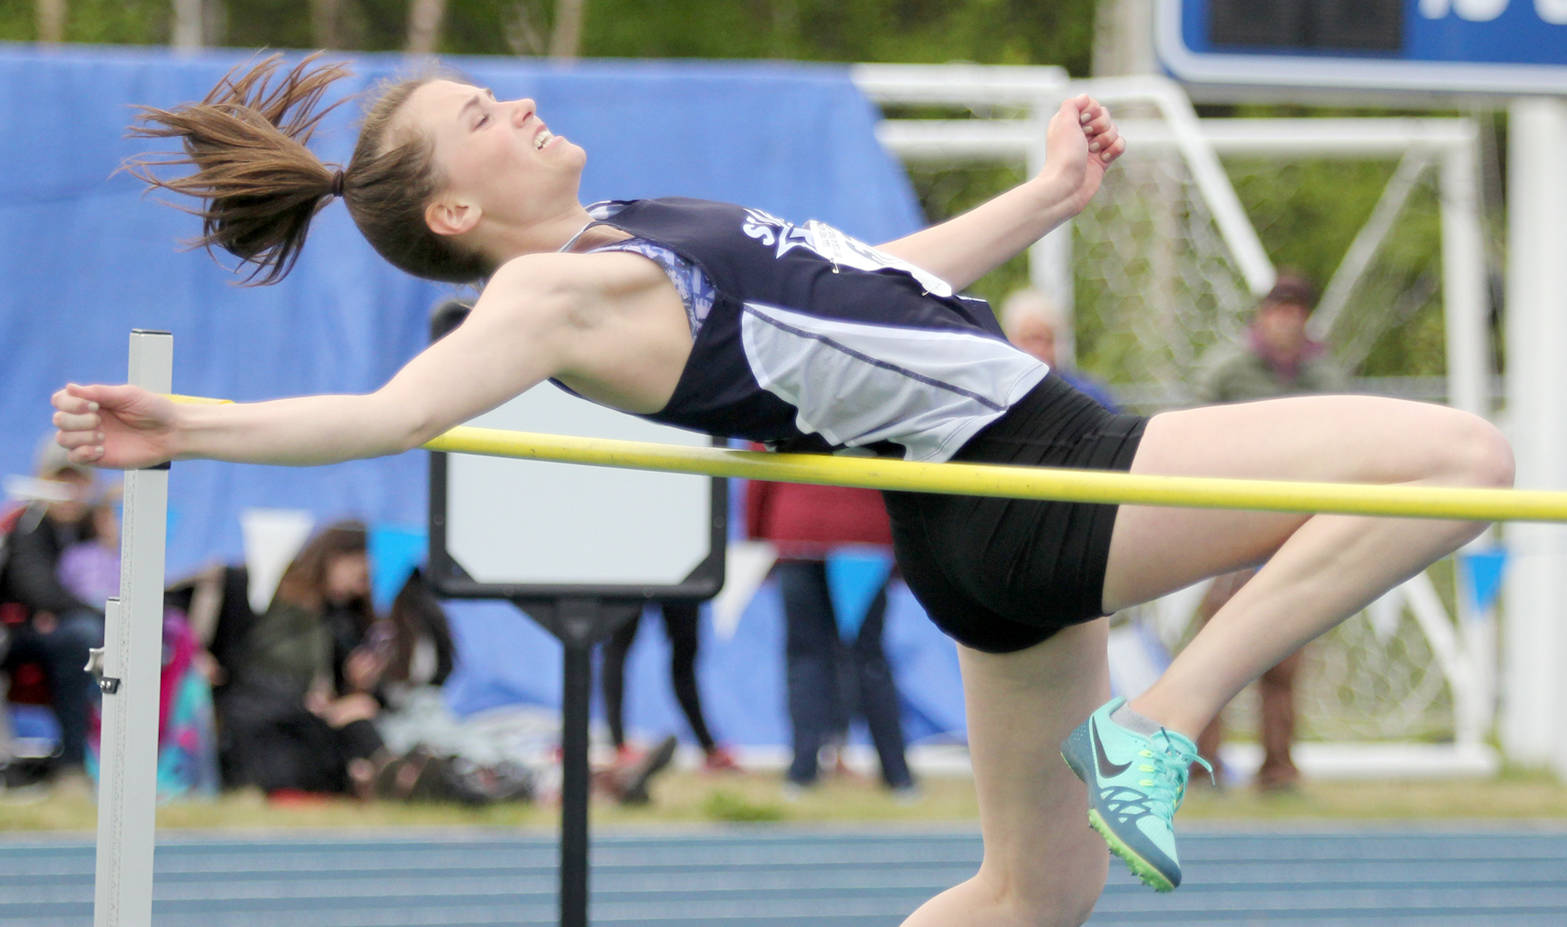 Soldotna’s Aliann Schmidt competes in the high jump Friday at the state track and field meet at Machetanz Field in Palmer. (Photo by Jeremiah Bartz/Frontiersman.com)